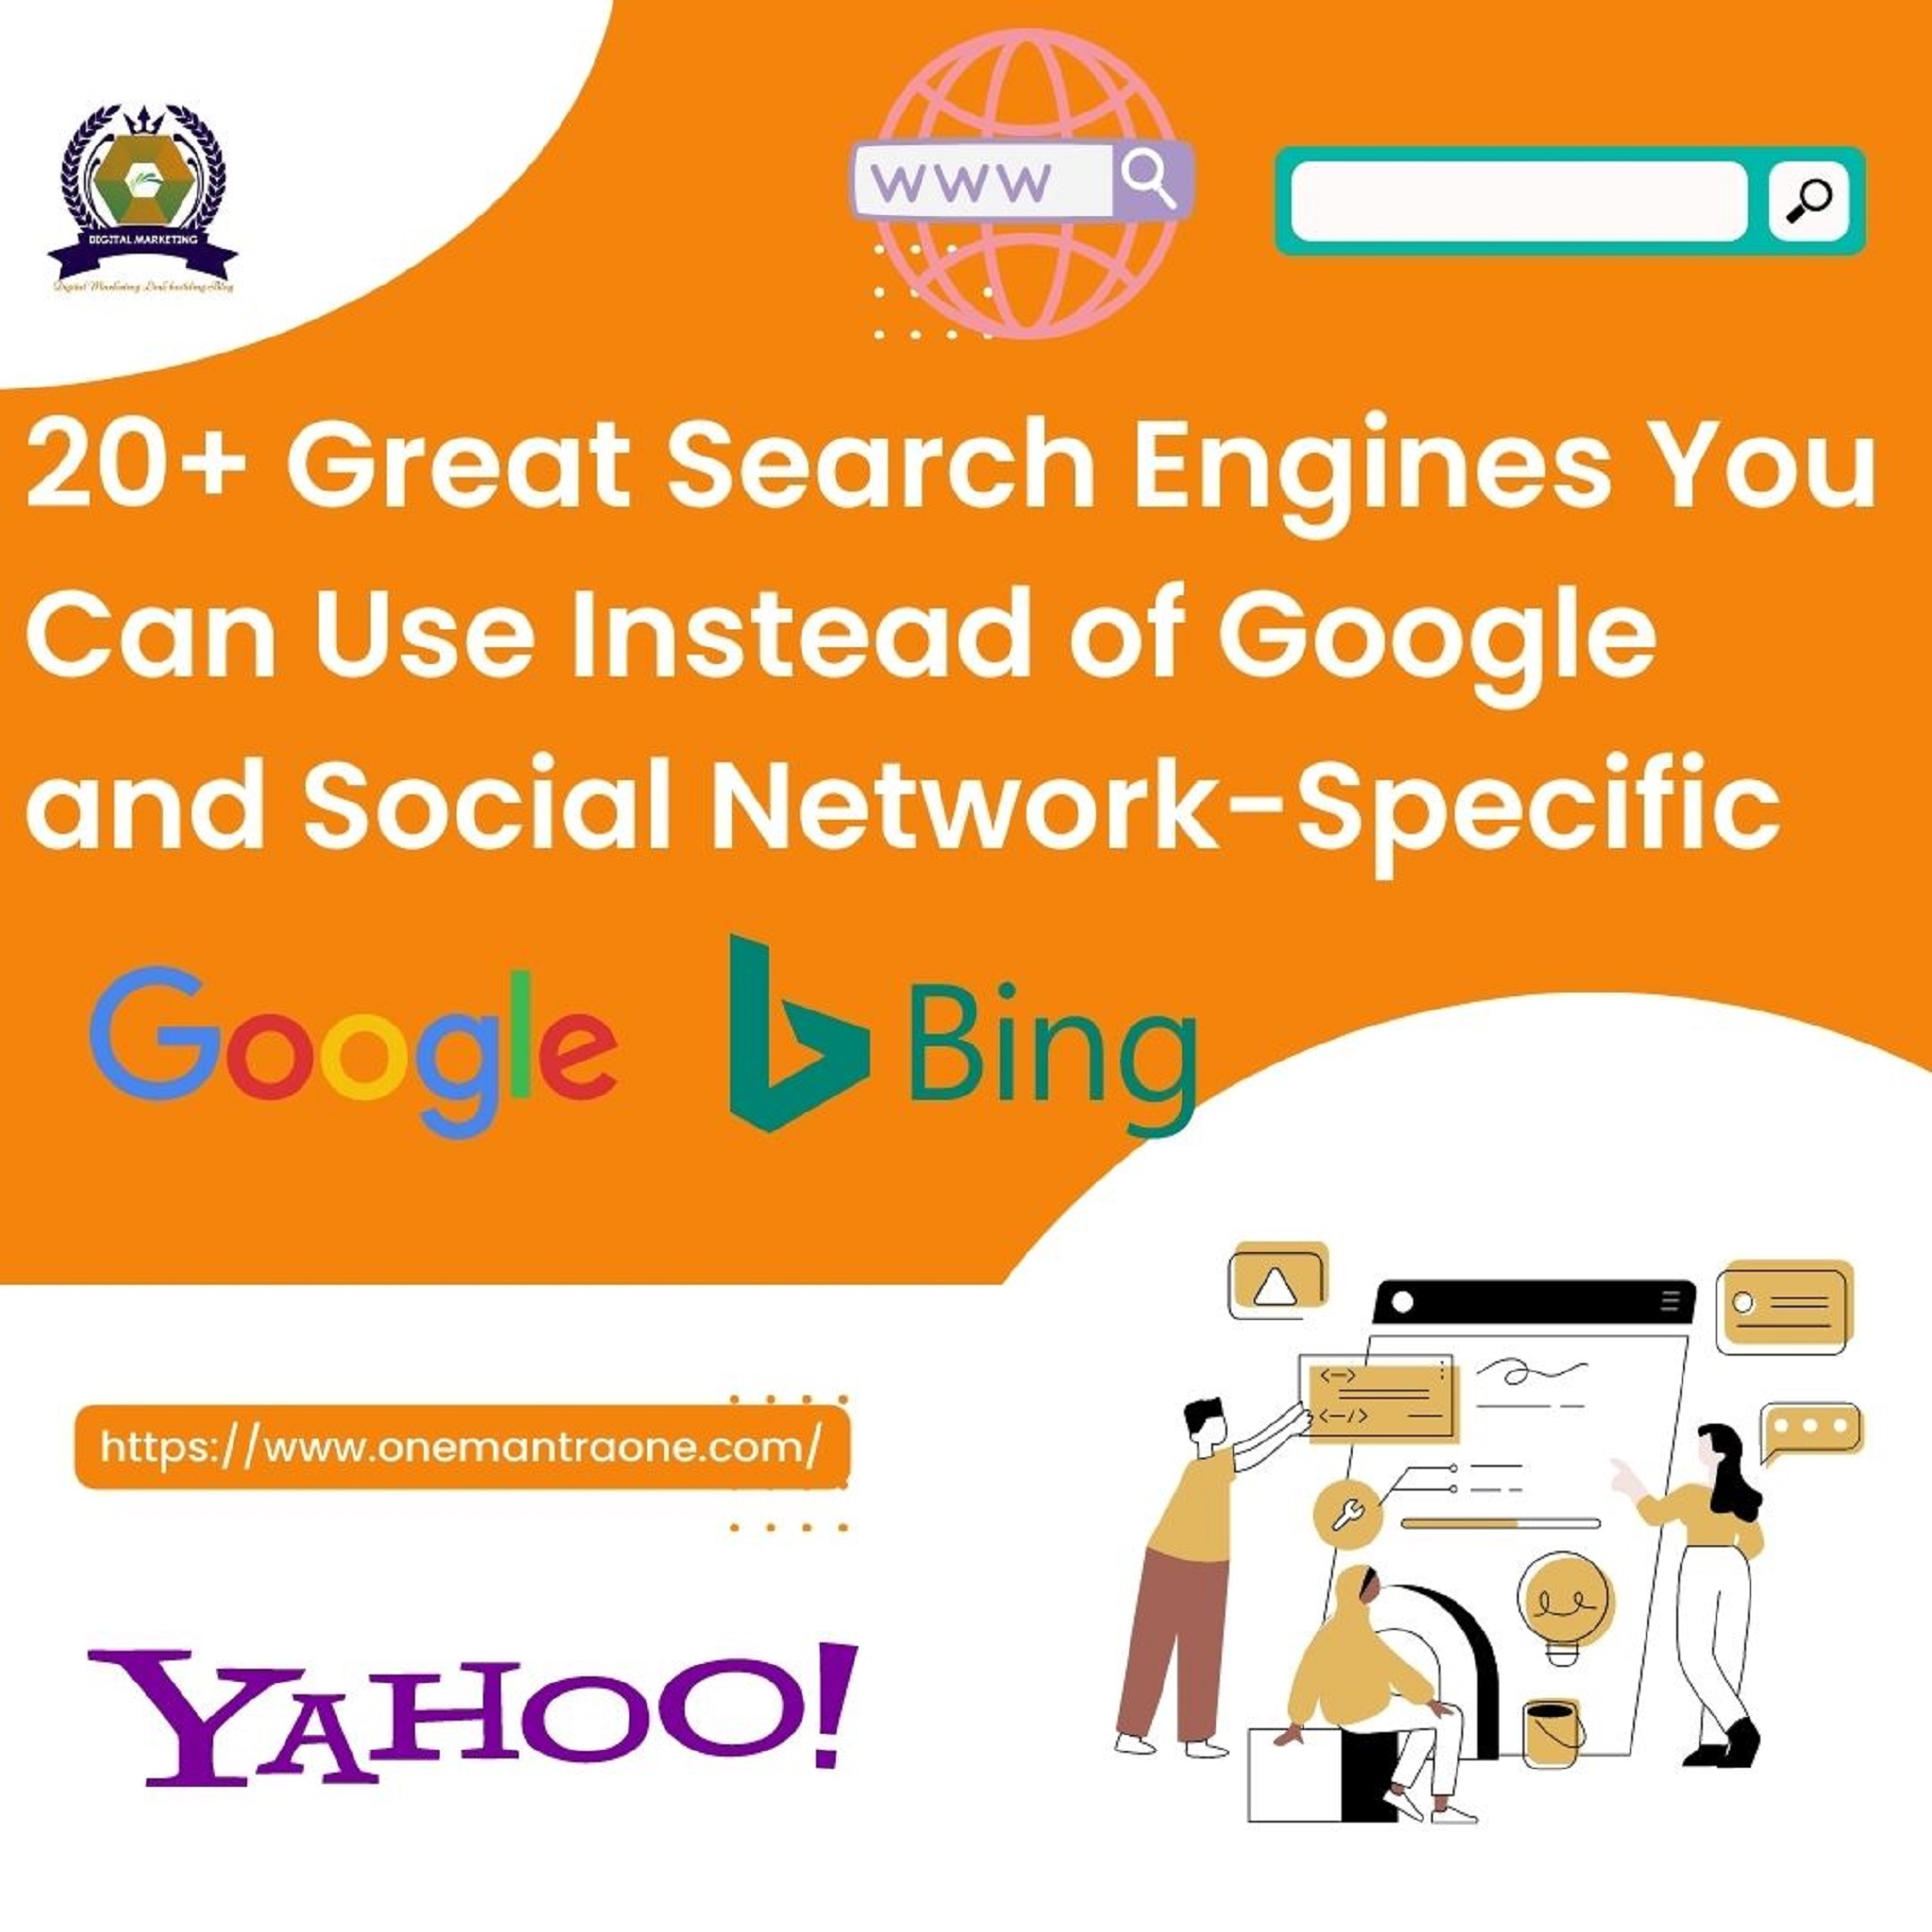 20+ Great Search Engines You Can Use Instead of Google and Social Network-Specific Advance Search Engines | OneMantra One